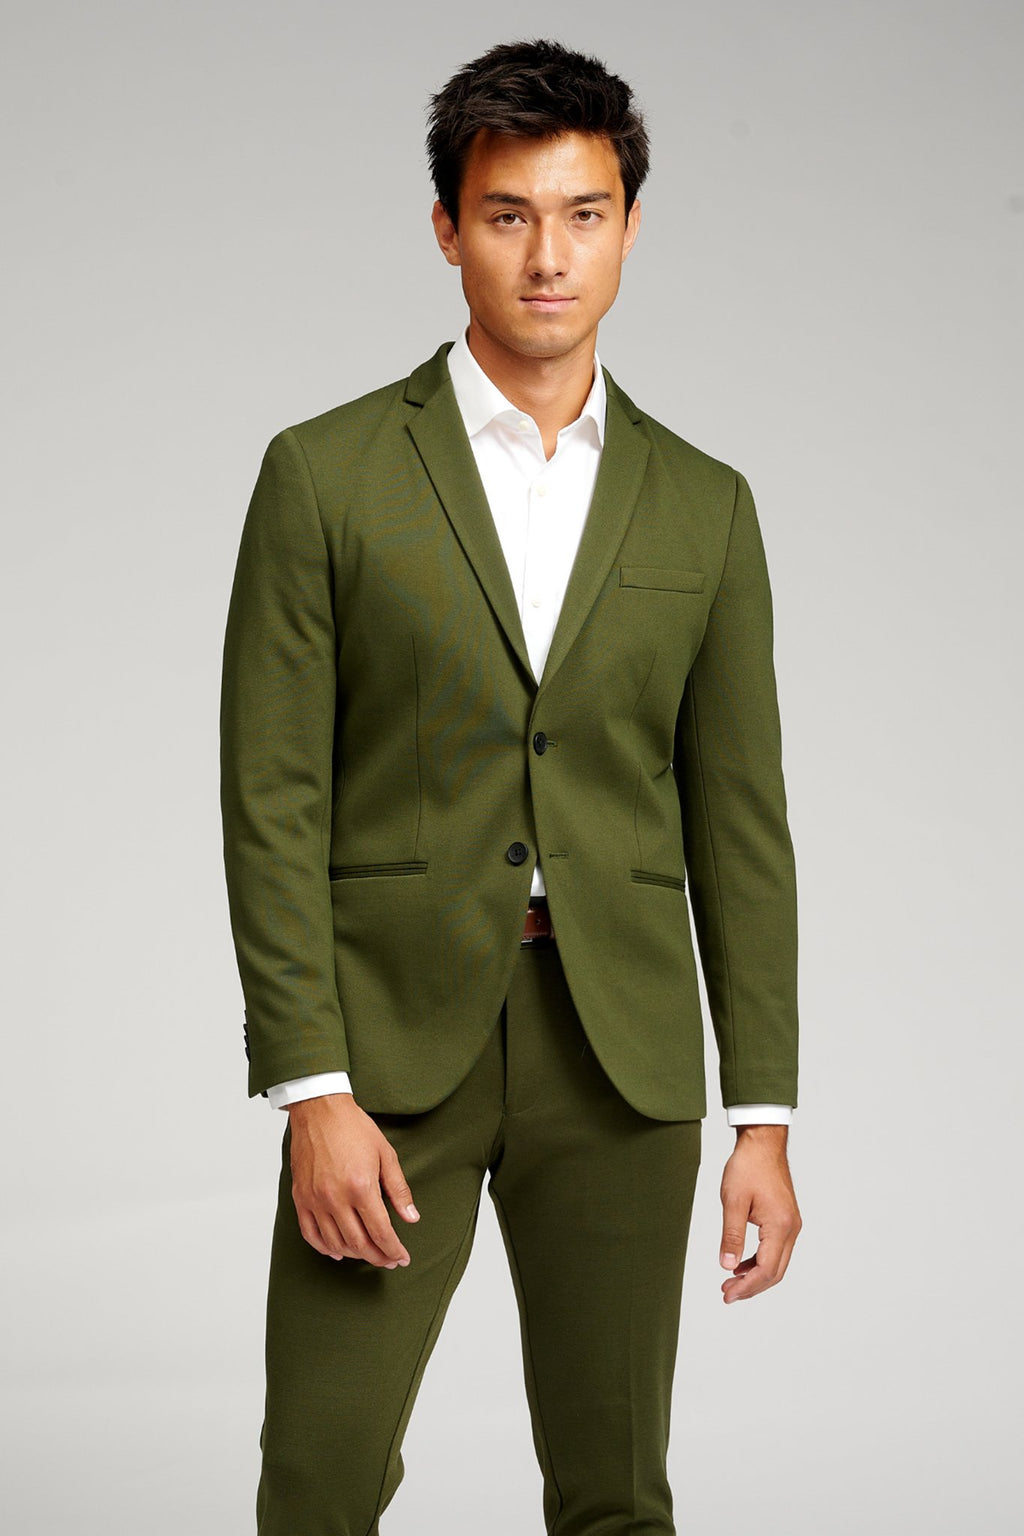 The Original Performance Suit™️ (Dark Green) + Tie - Package Deal (V.I.P)